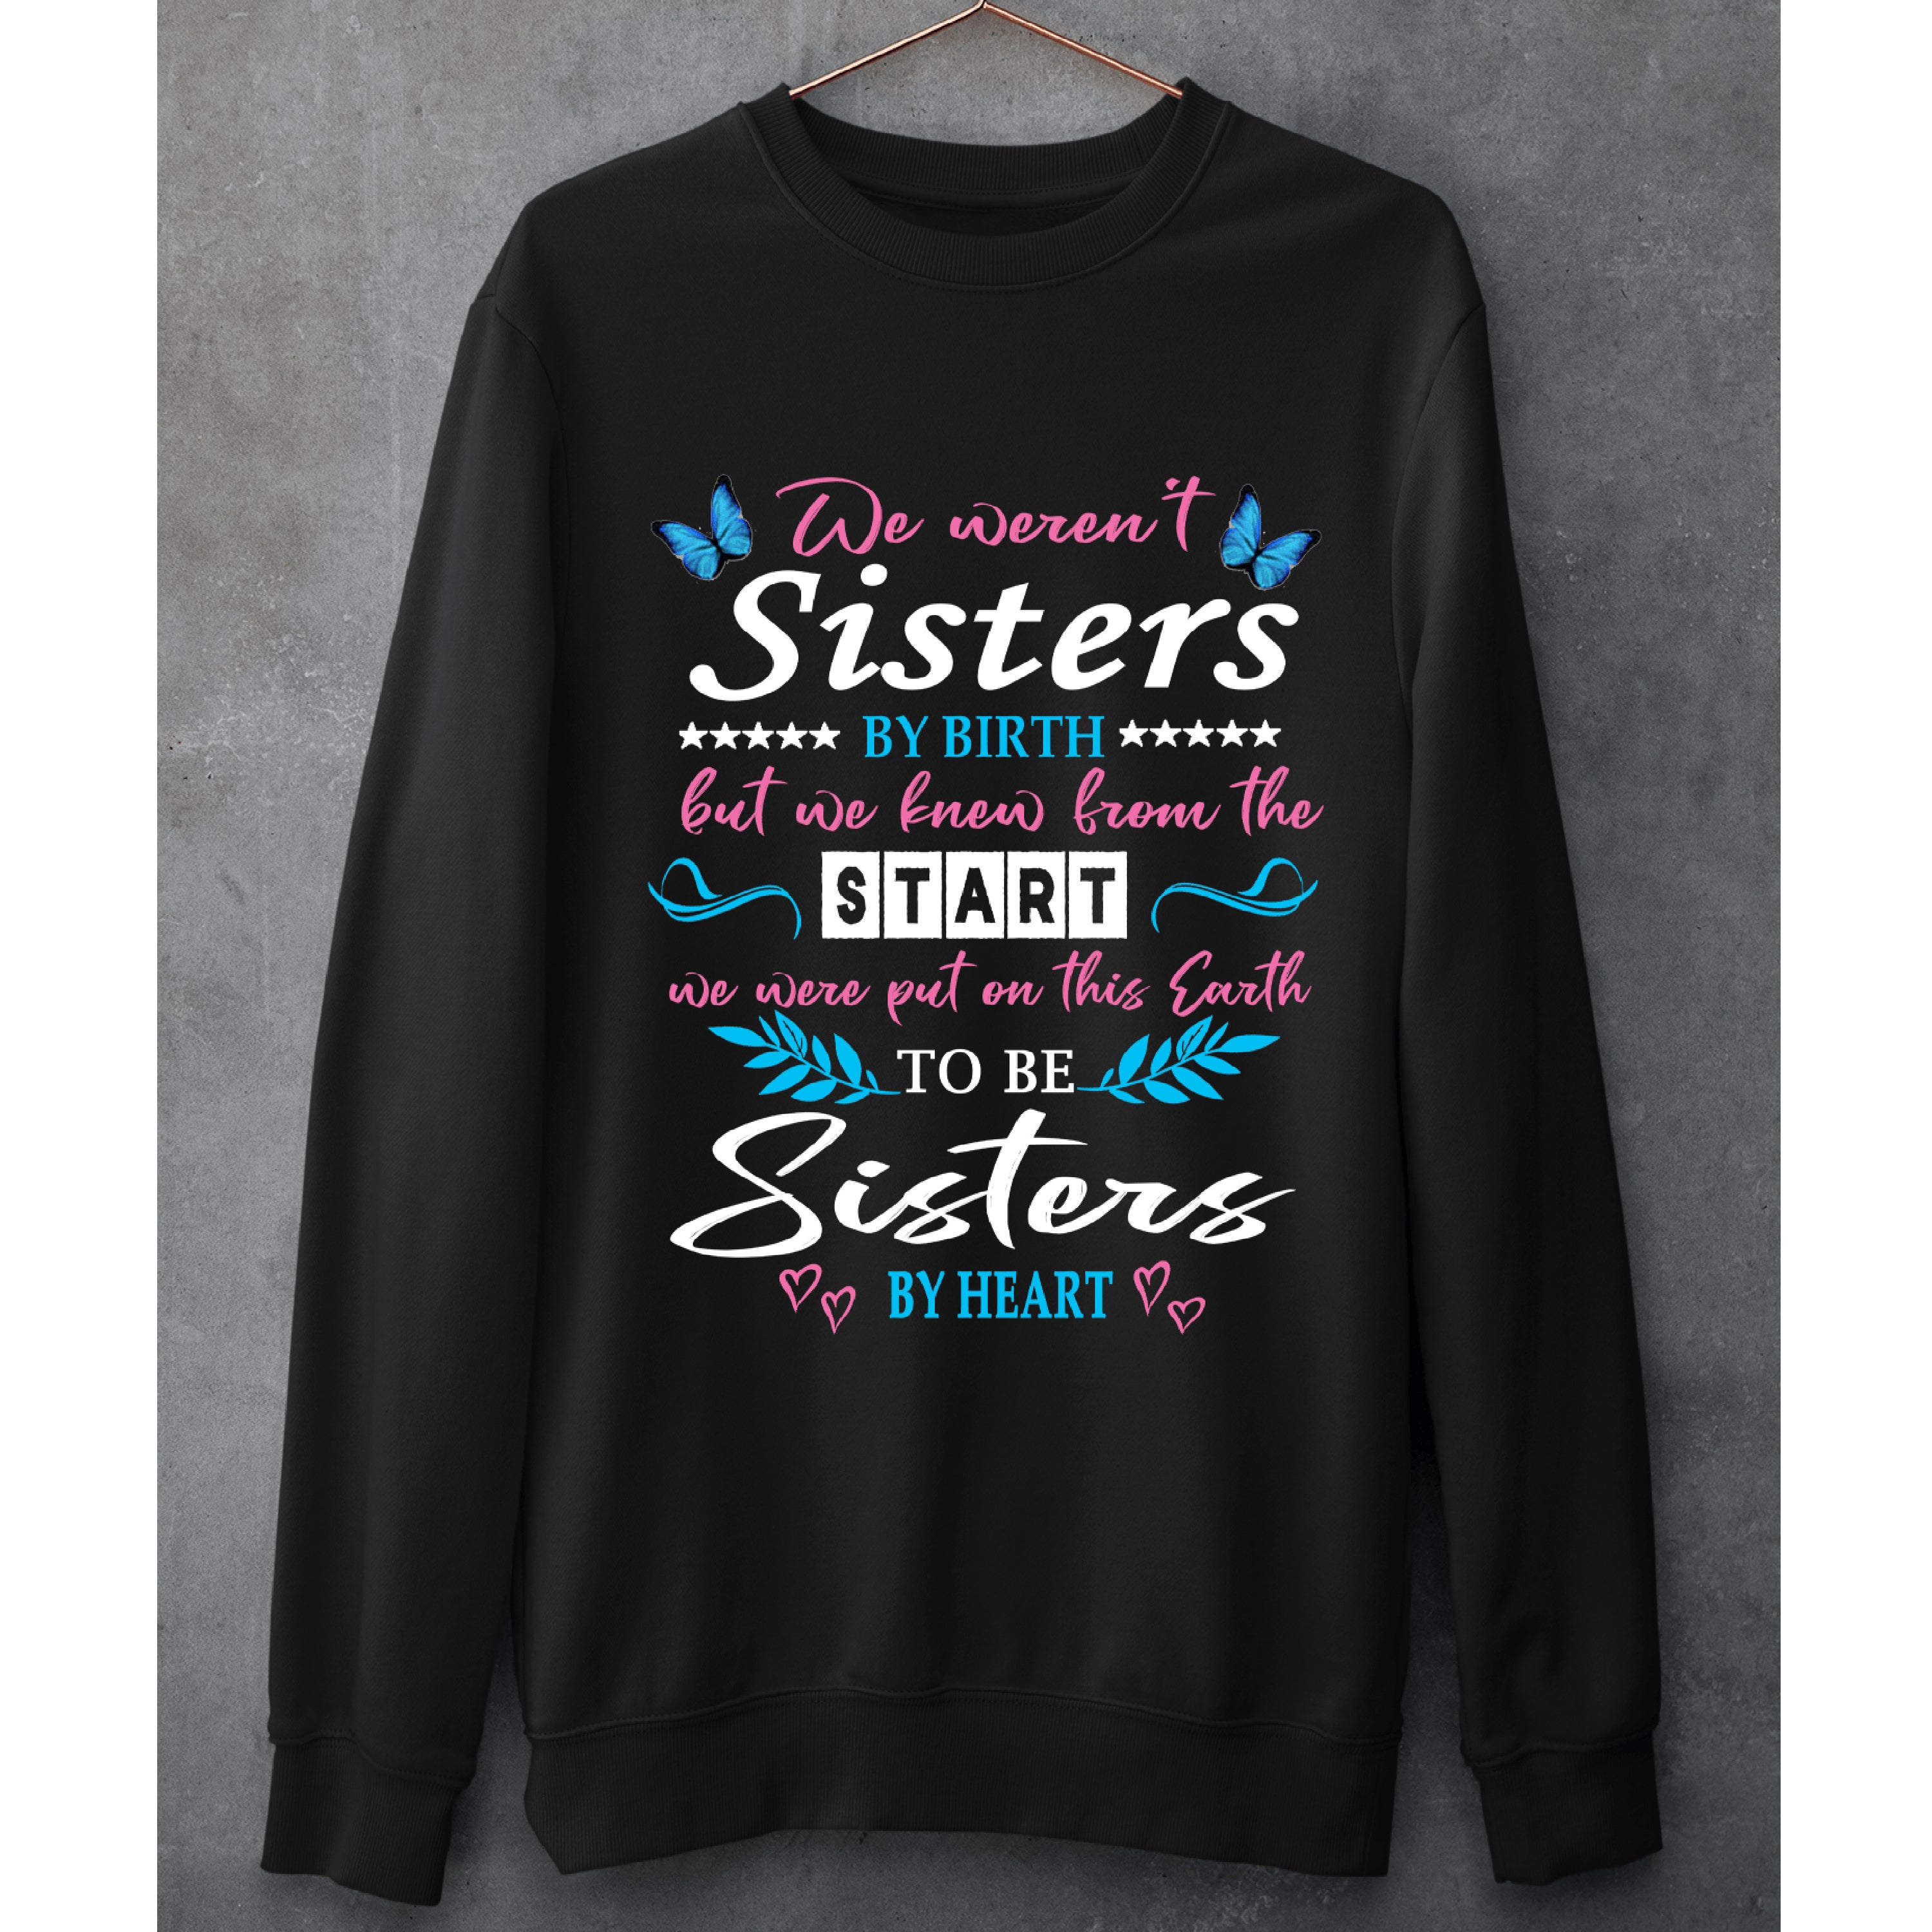 "We Weren't Sisters By Birth" - NEW